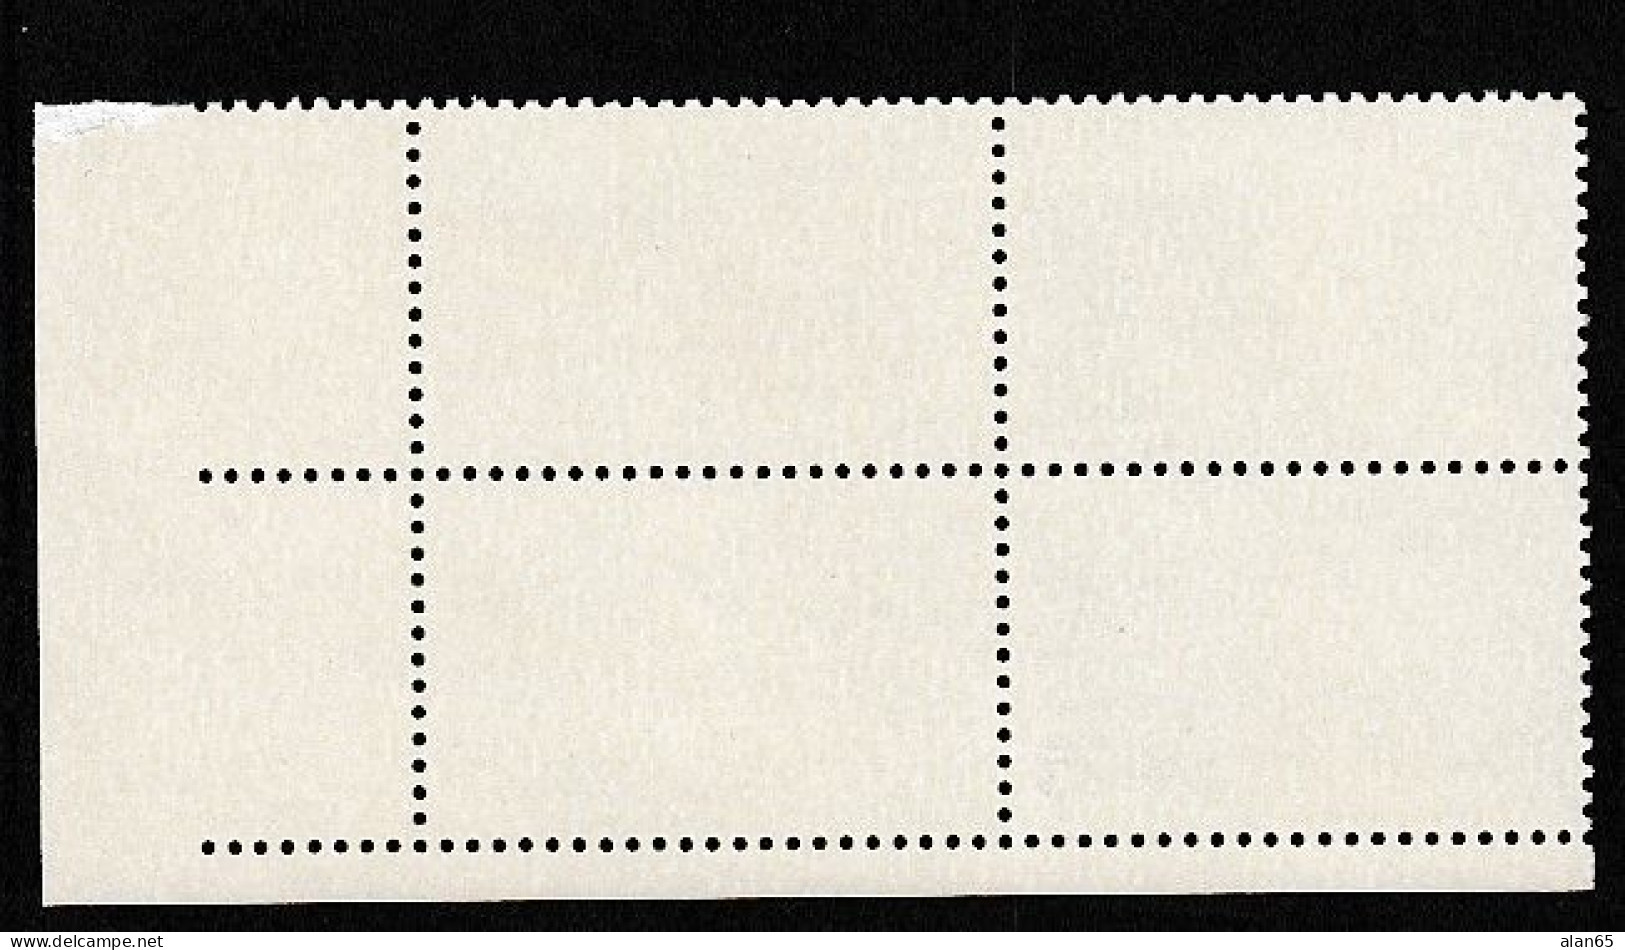 Sc#2506-2507, Micronesia & Marshall Islands, 25-cent 1990 Issue, Plate # Block Of 4 MNH US Postage Stamps - Plattennummern